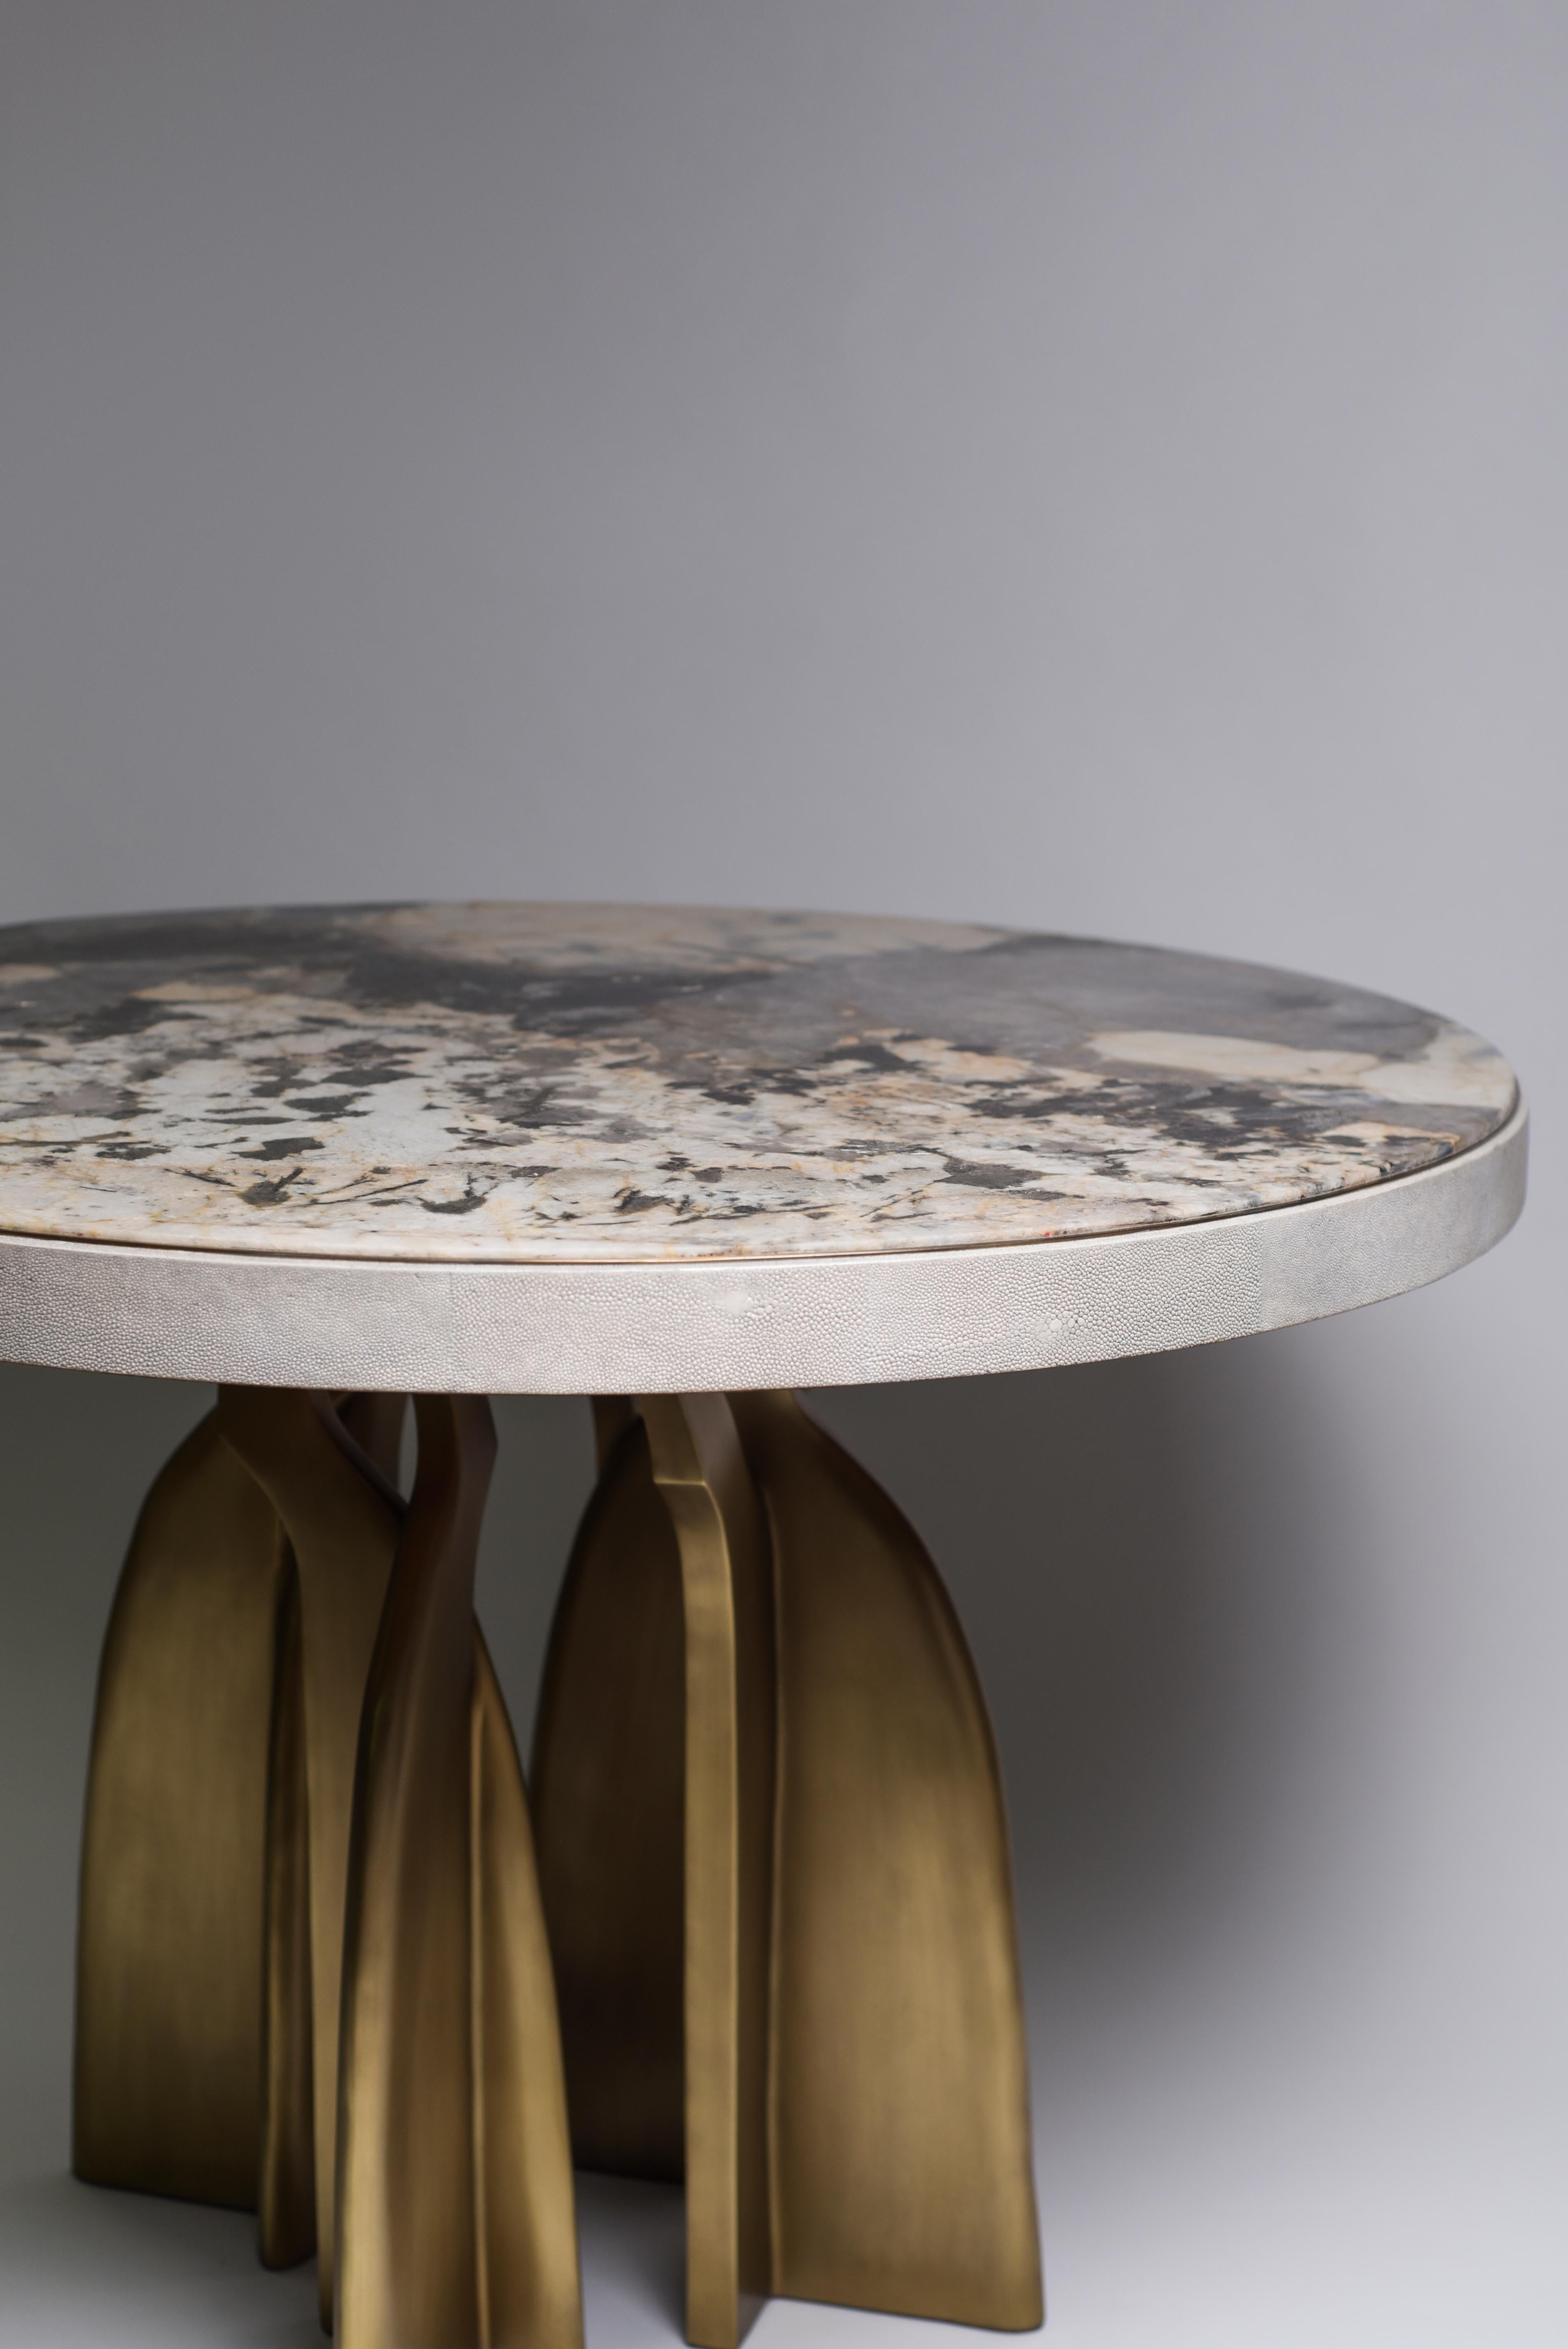 Contemporary Shagreen Breakfast Table with Sculptural Bronze-Patina Brass Legs by Kifu, Paris For Sale